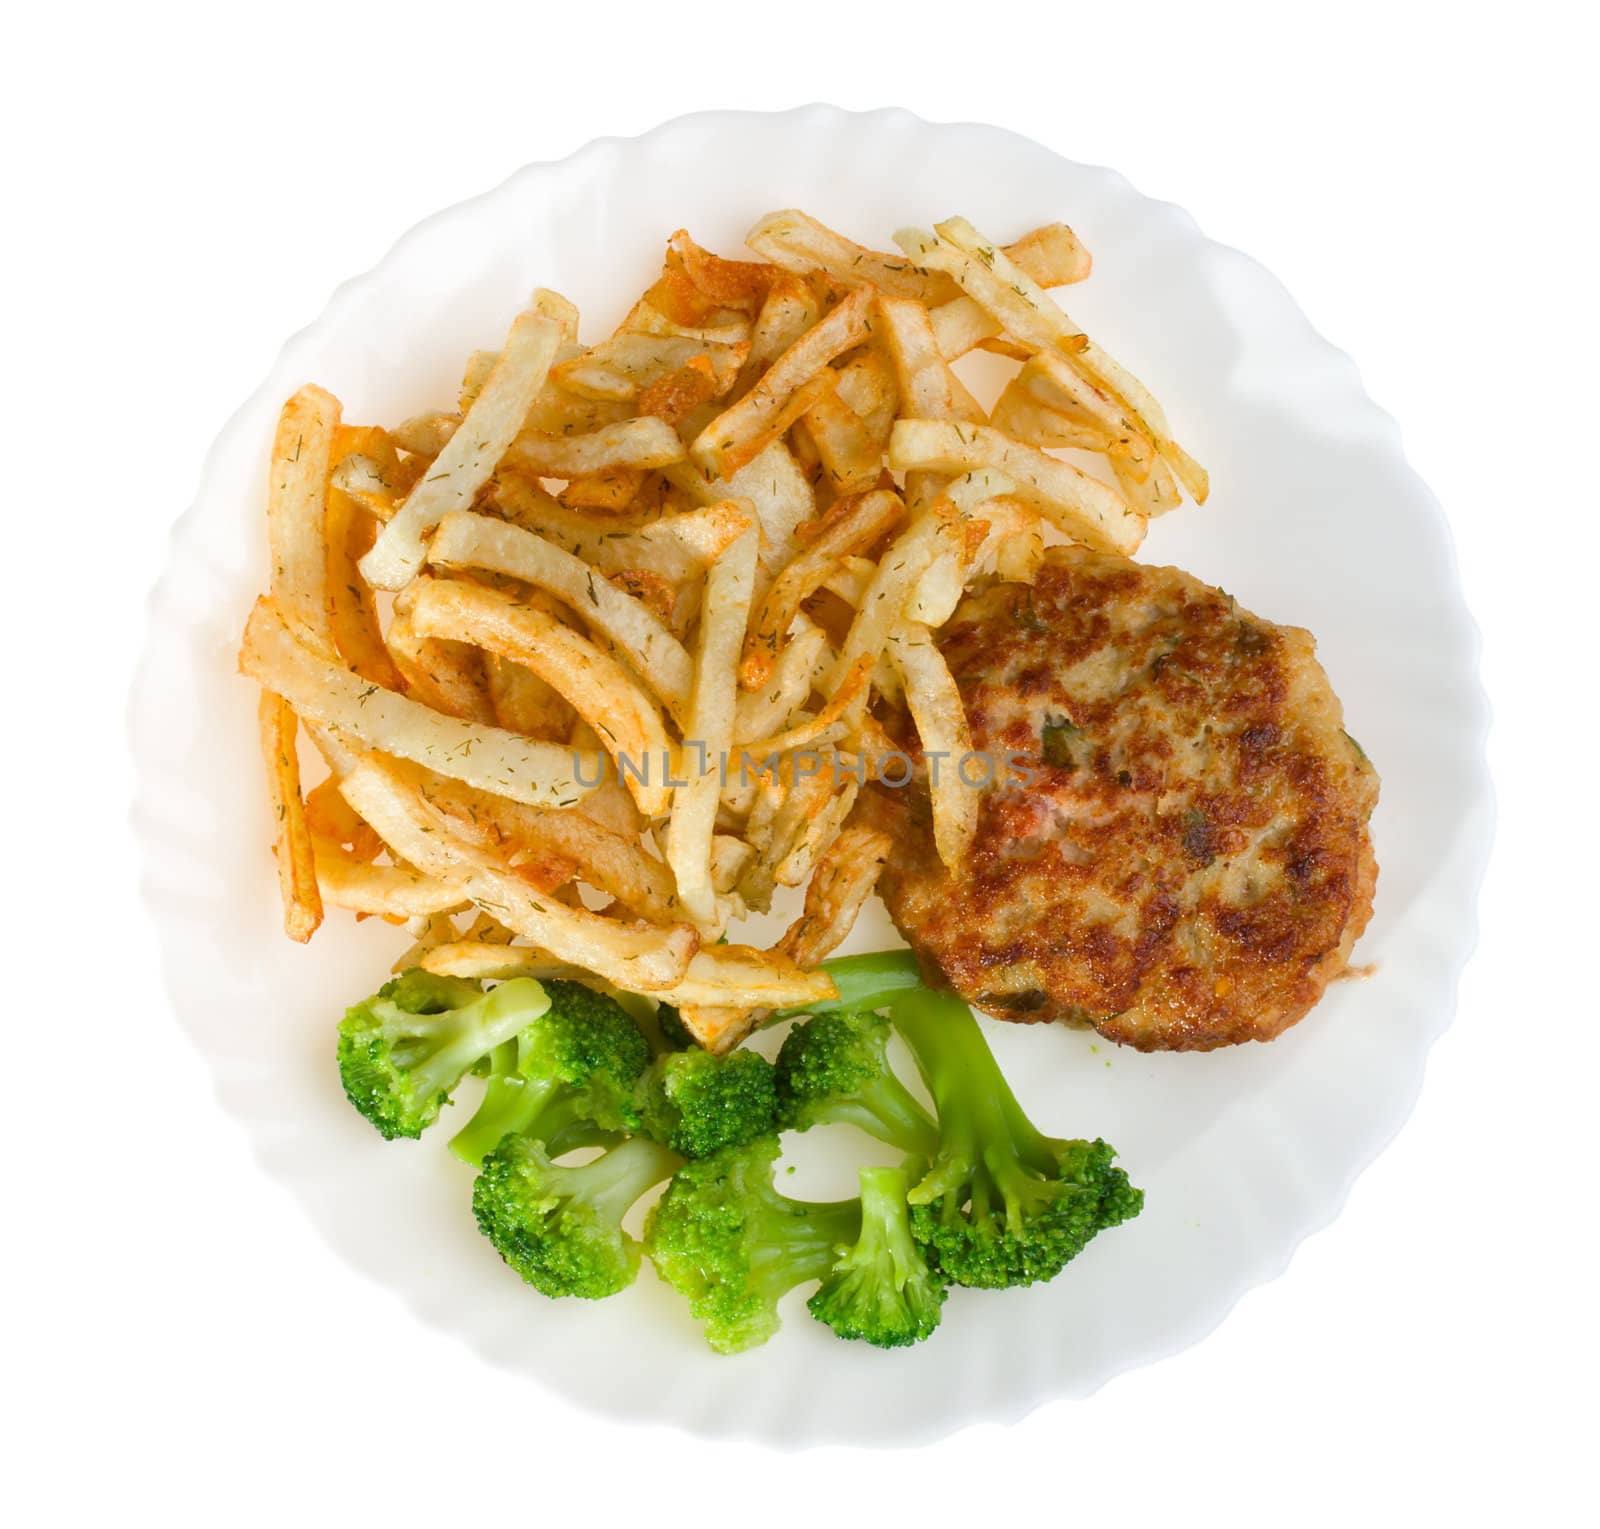 fried potatoes with cutlet and broccoli by Alekcey